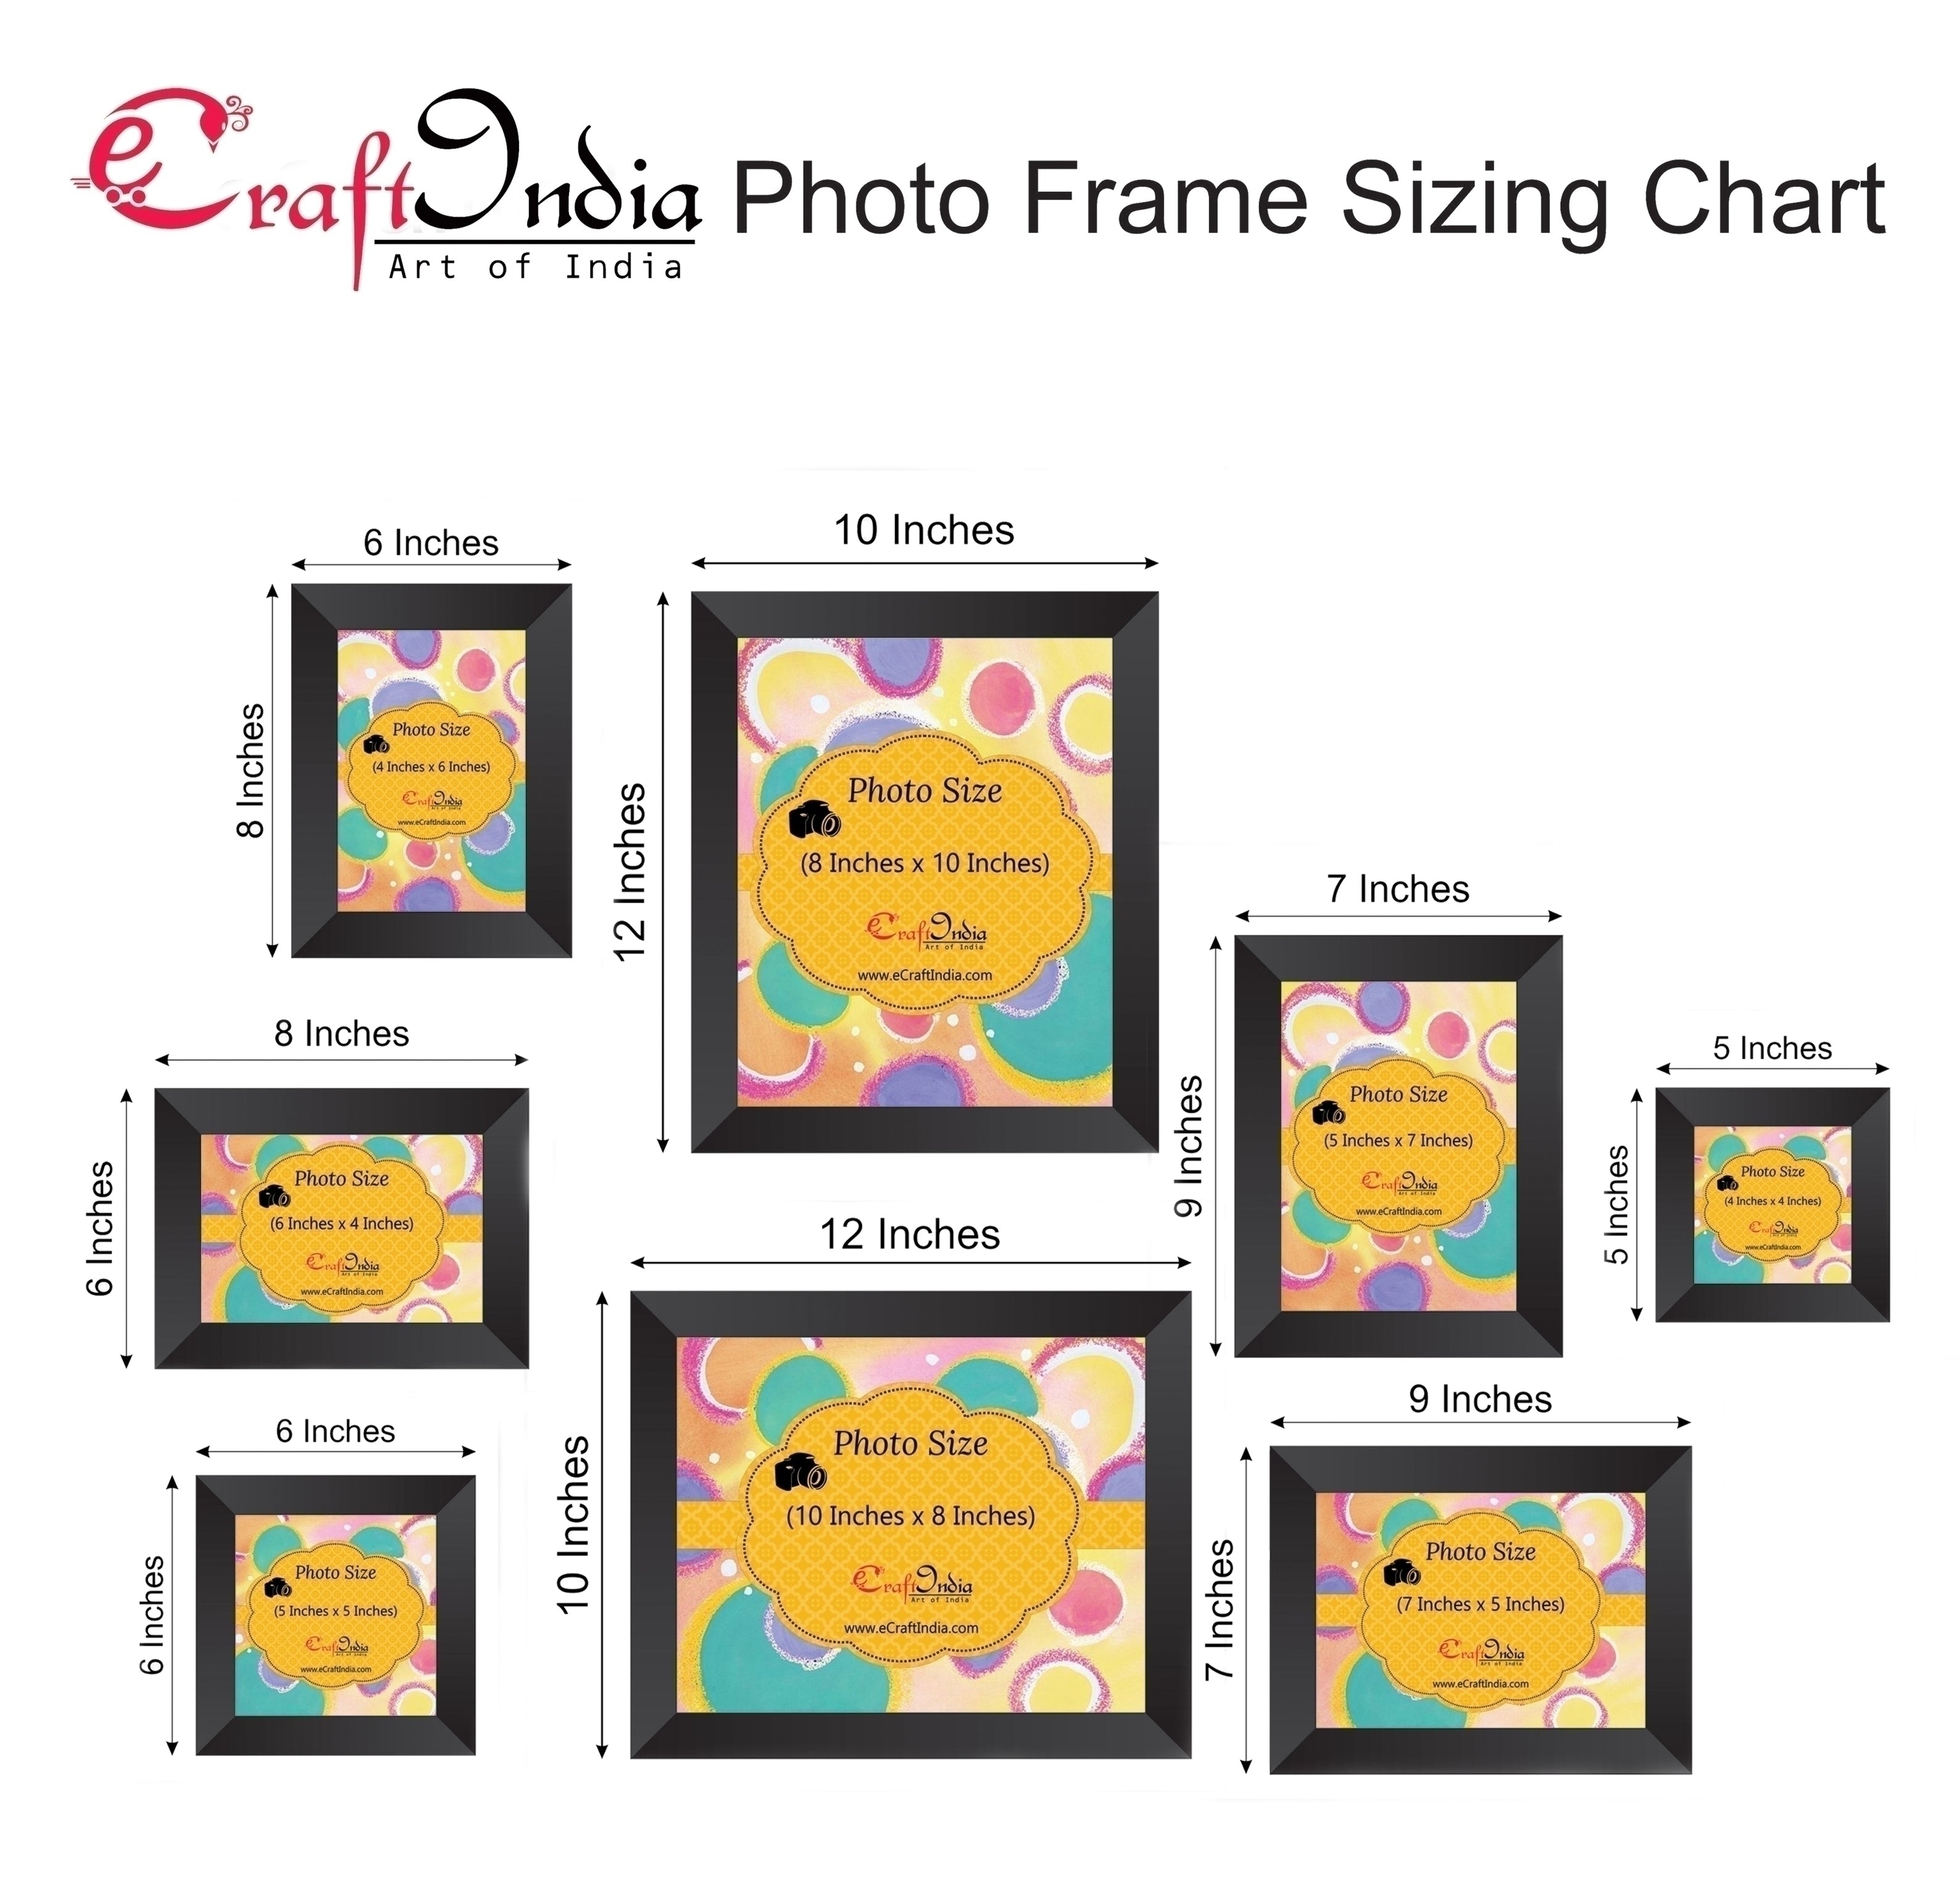 Memory Wall Collage Photo Frame Set of 8 individual photo frames 3